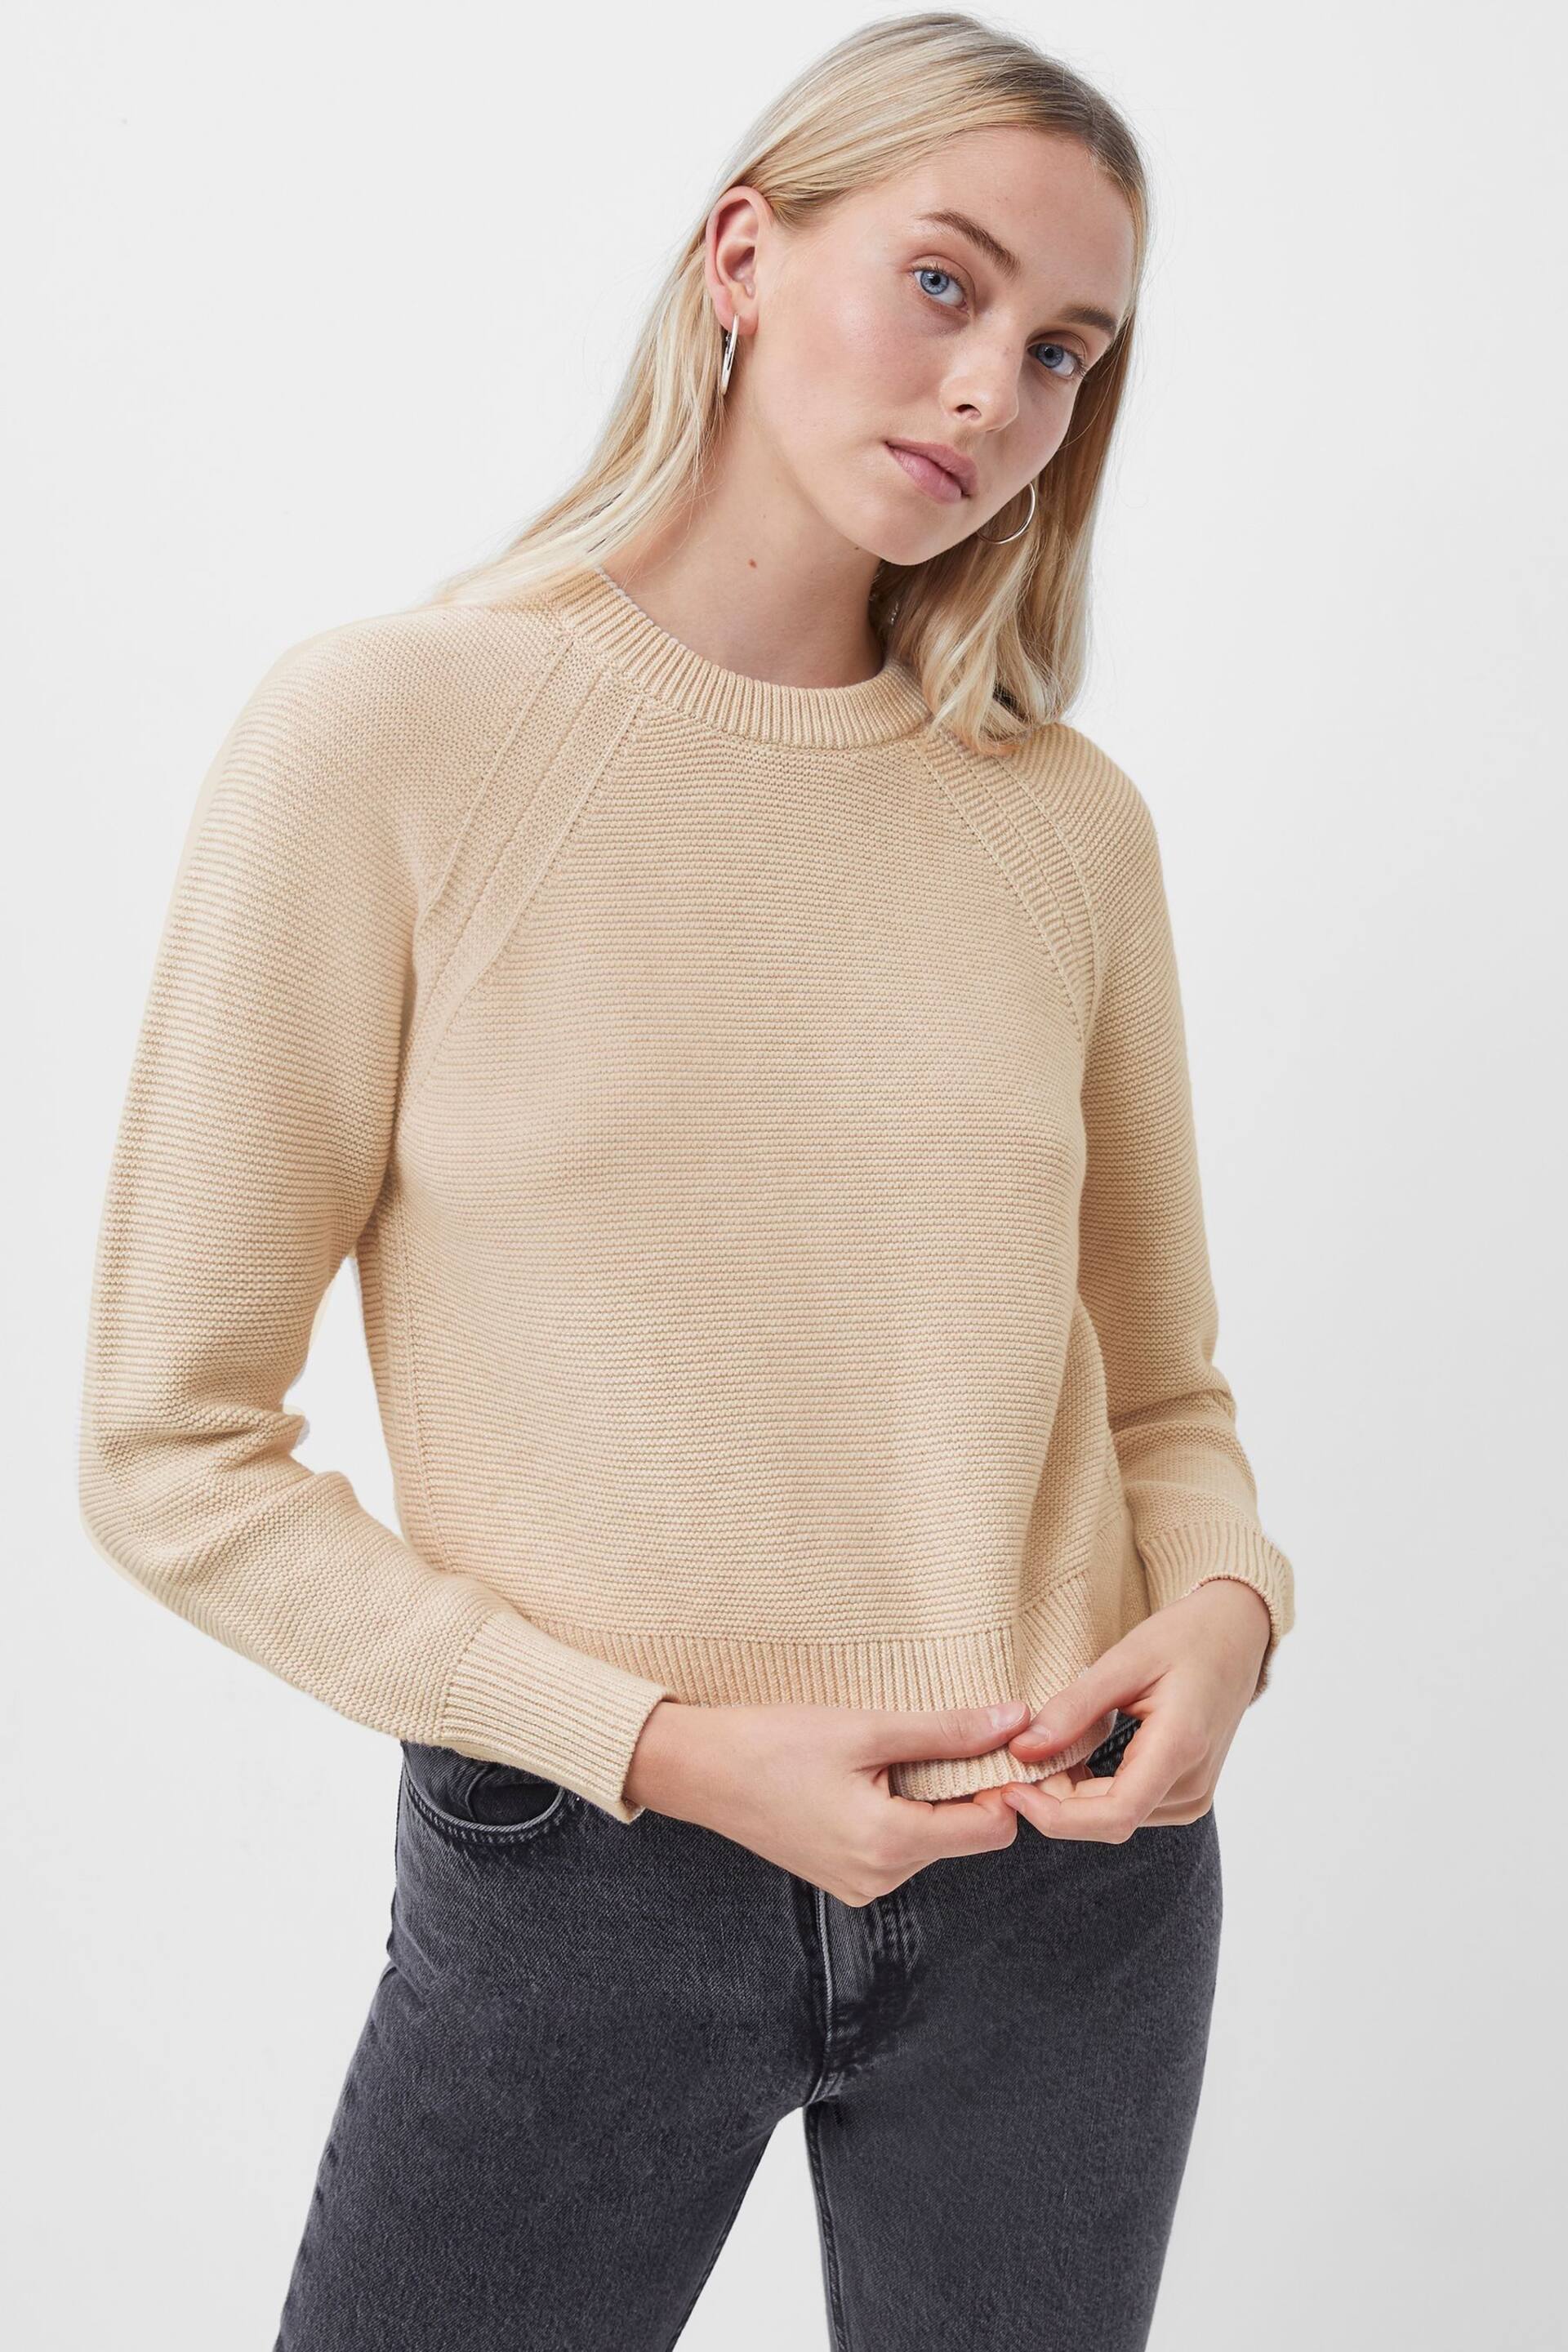 French Connection Lilly Mozart Crew Neck Jumper - Image 1 of 4